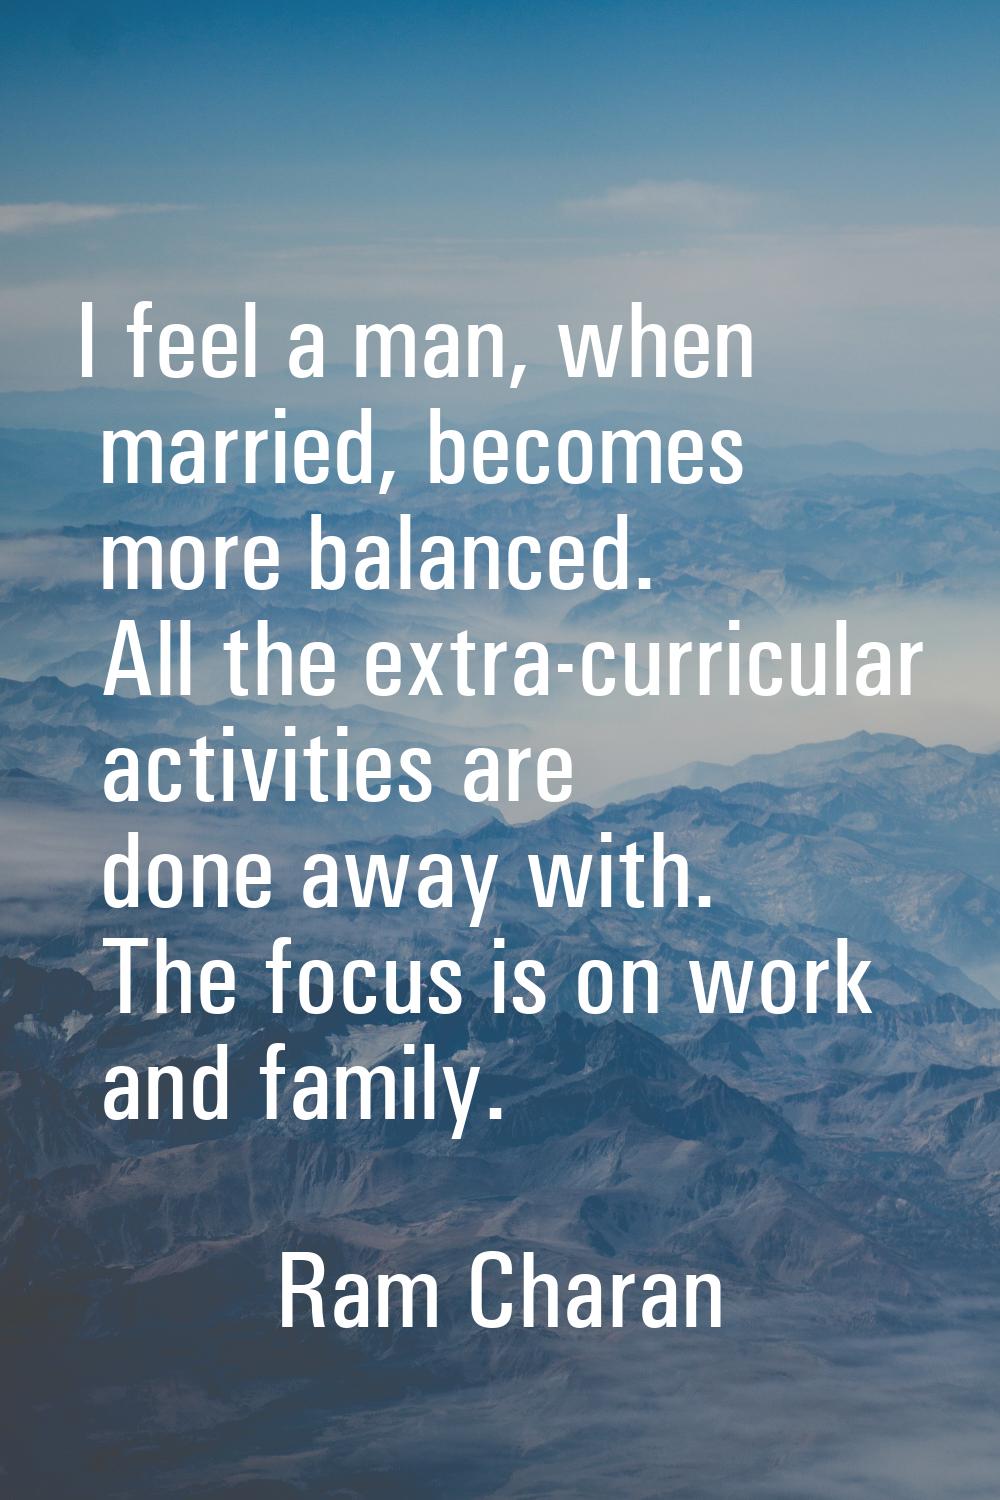 I feel a man, when married, becomes more balanced. All the extra-curricular activities are done awa